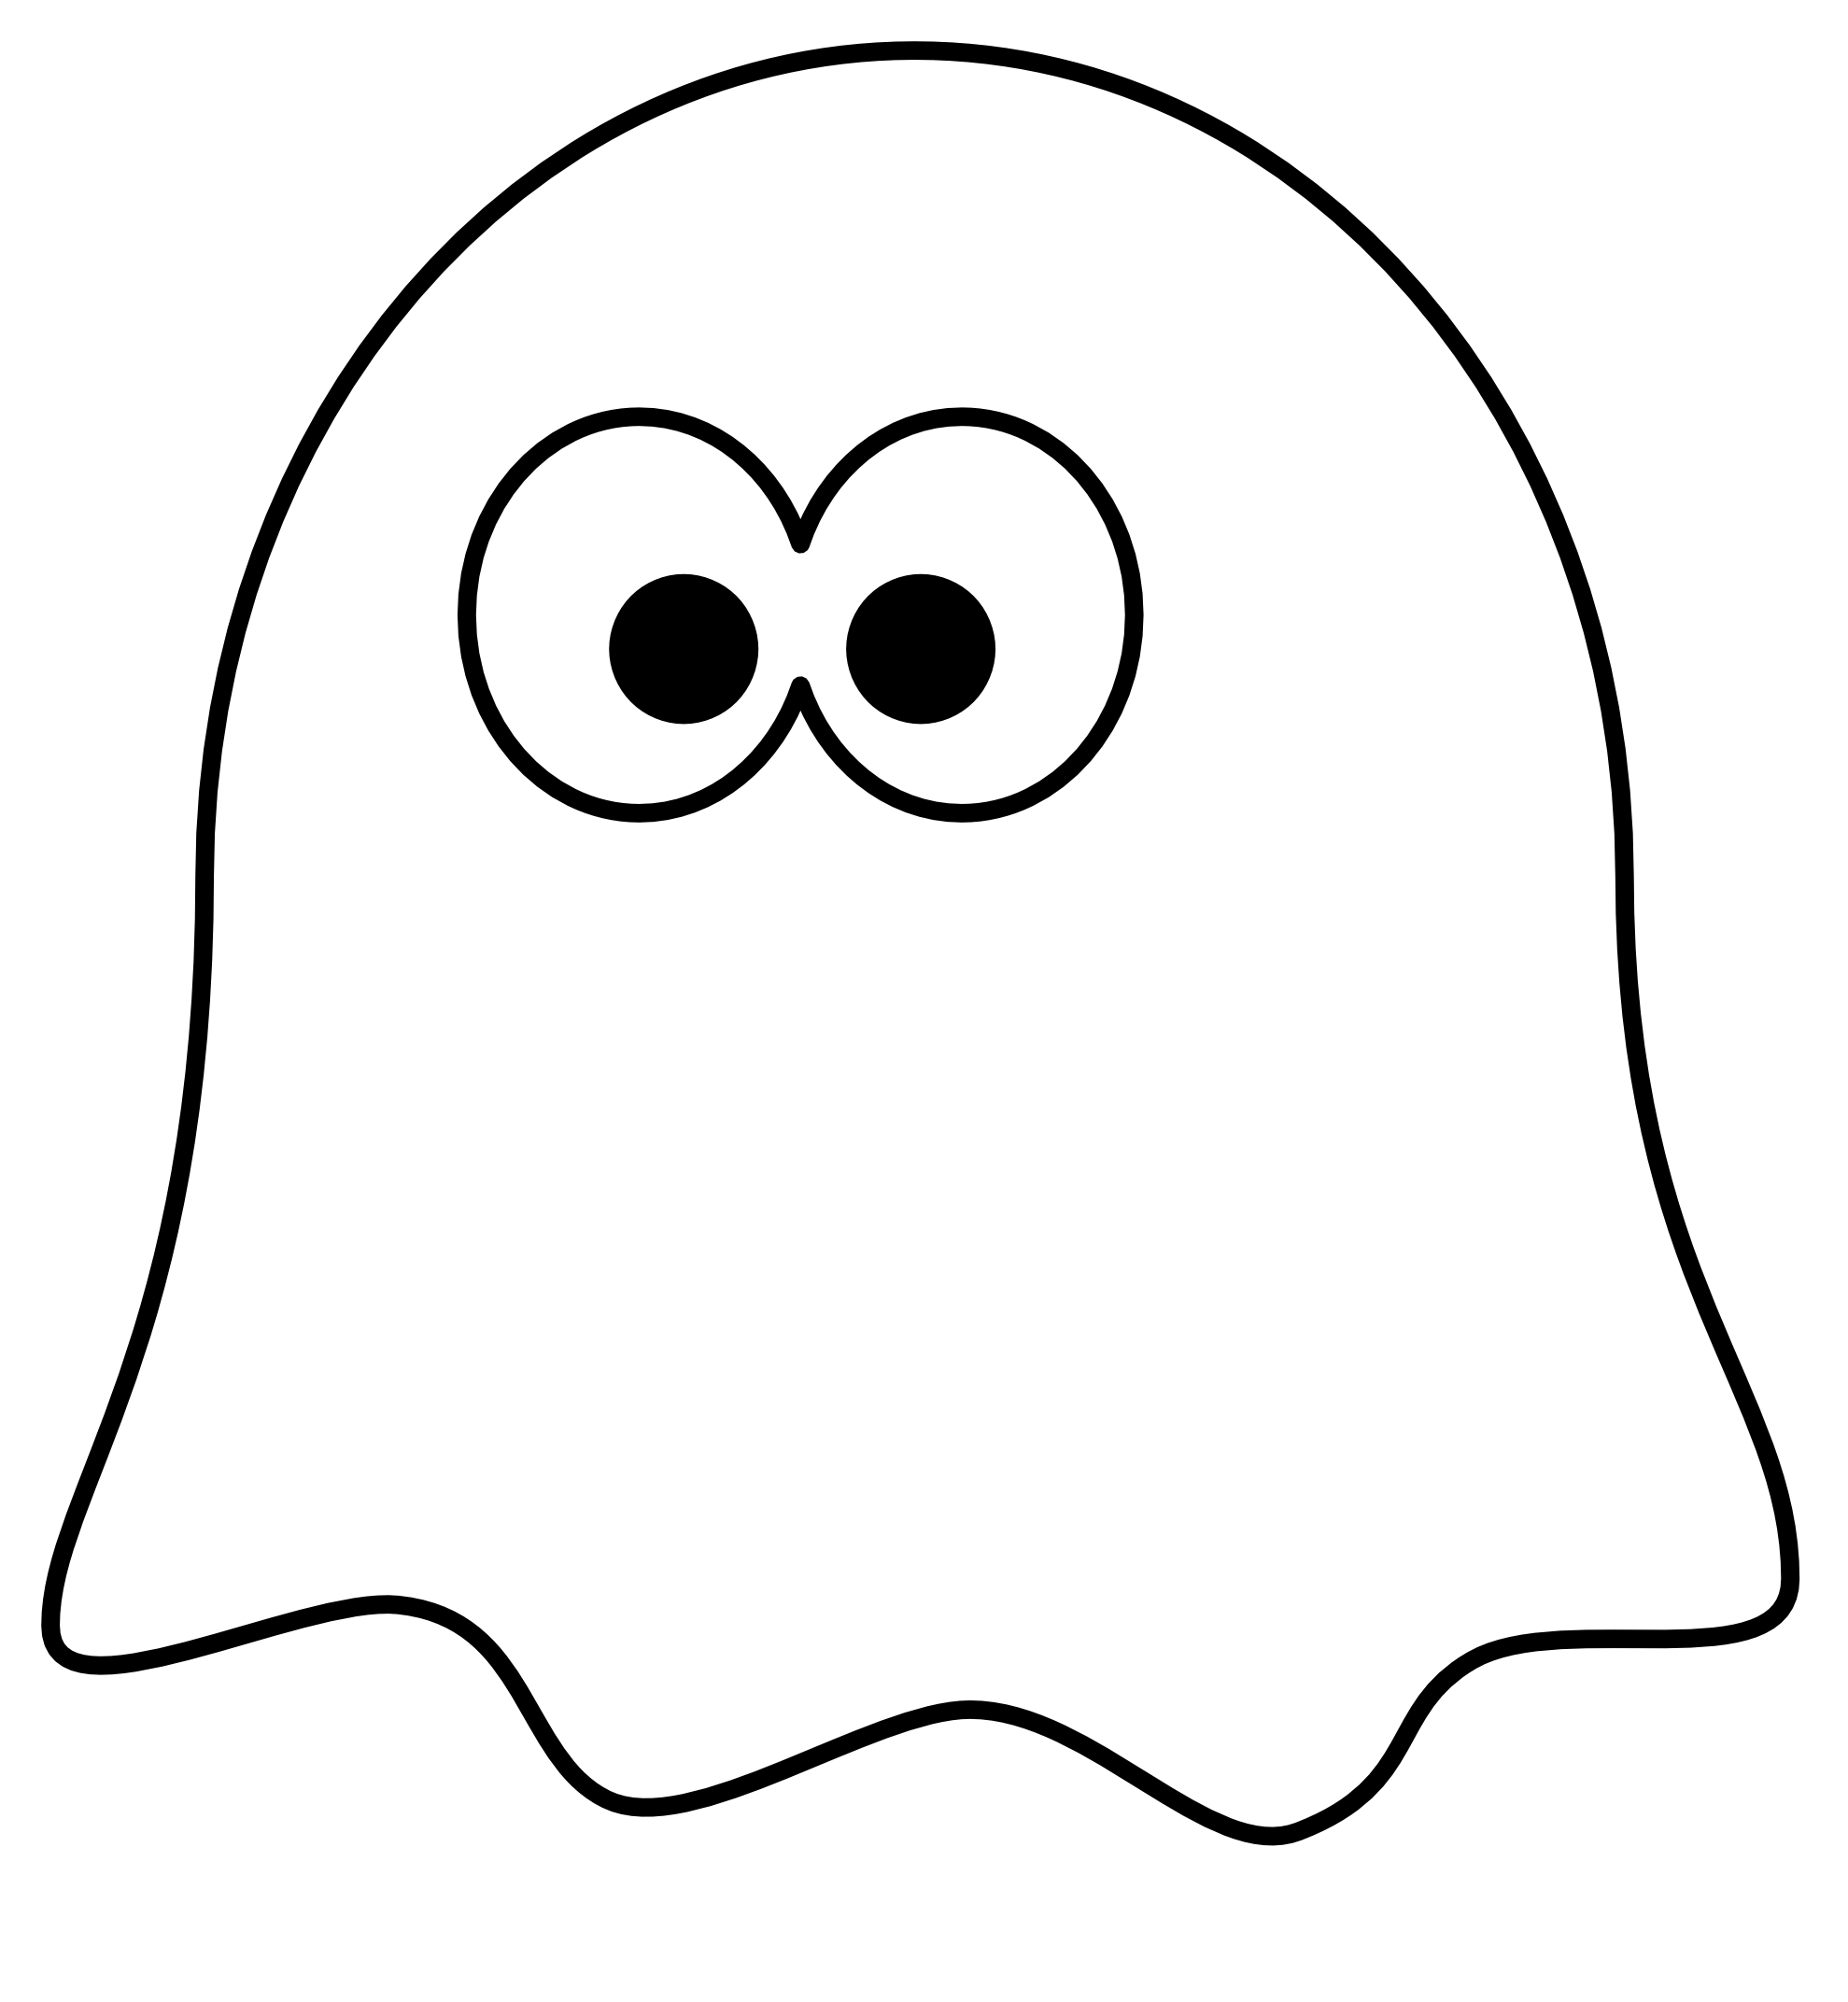 Funny Ghost Cartoons - ClipArt Best